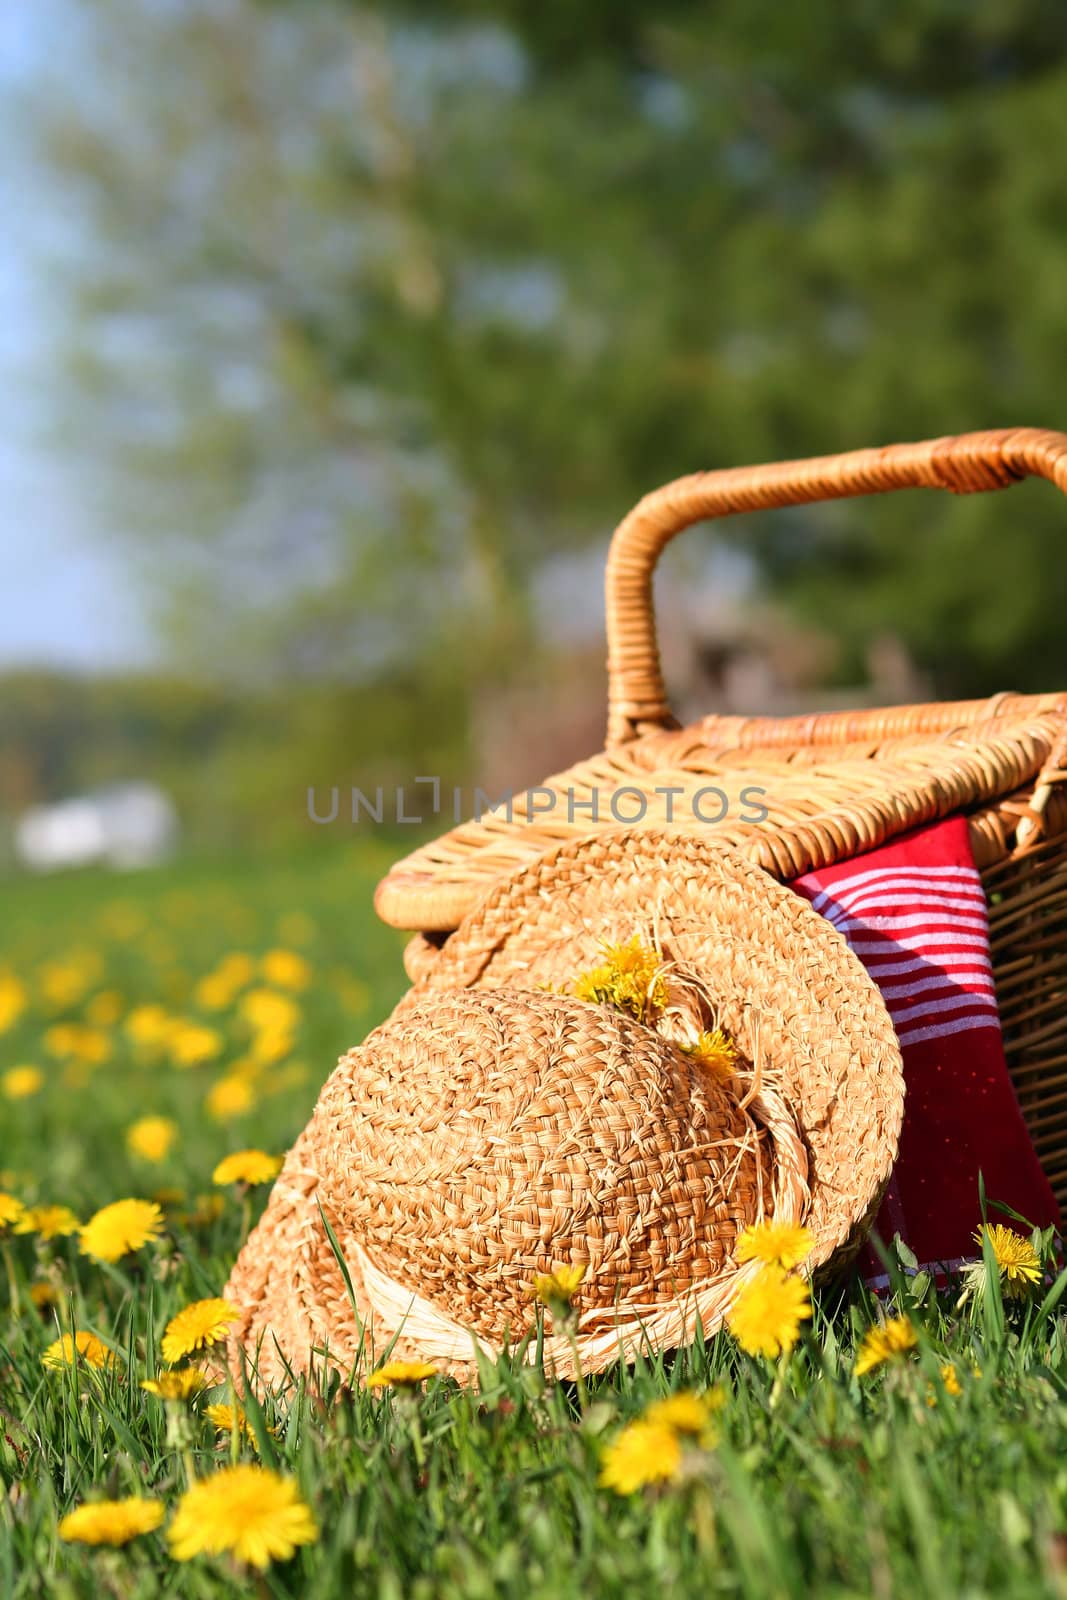 A picnic on the grass with wicker basket and sun hat